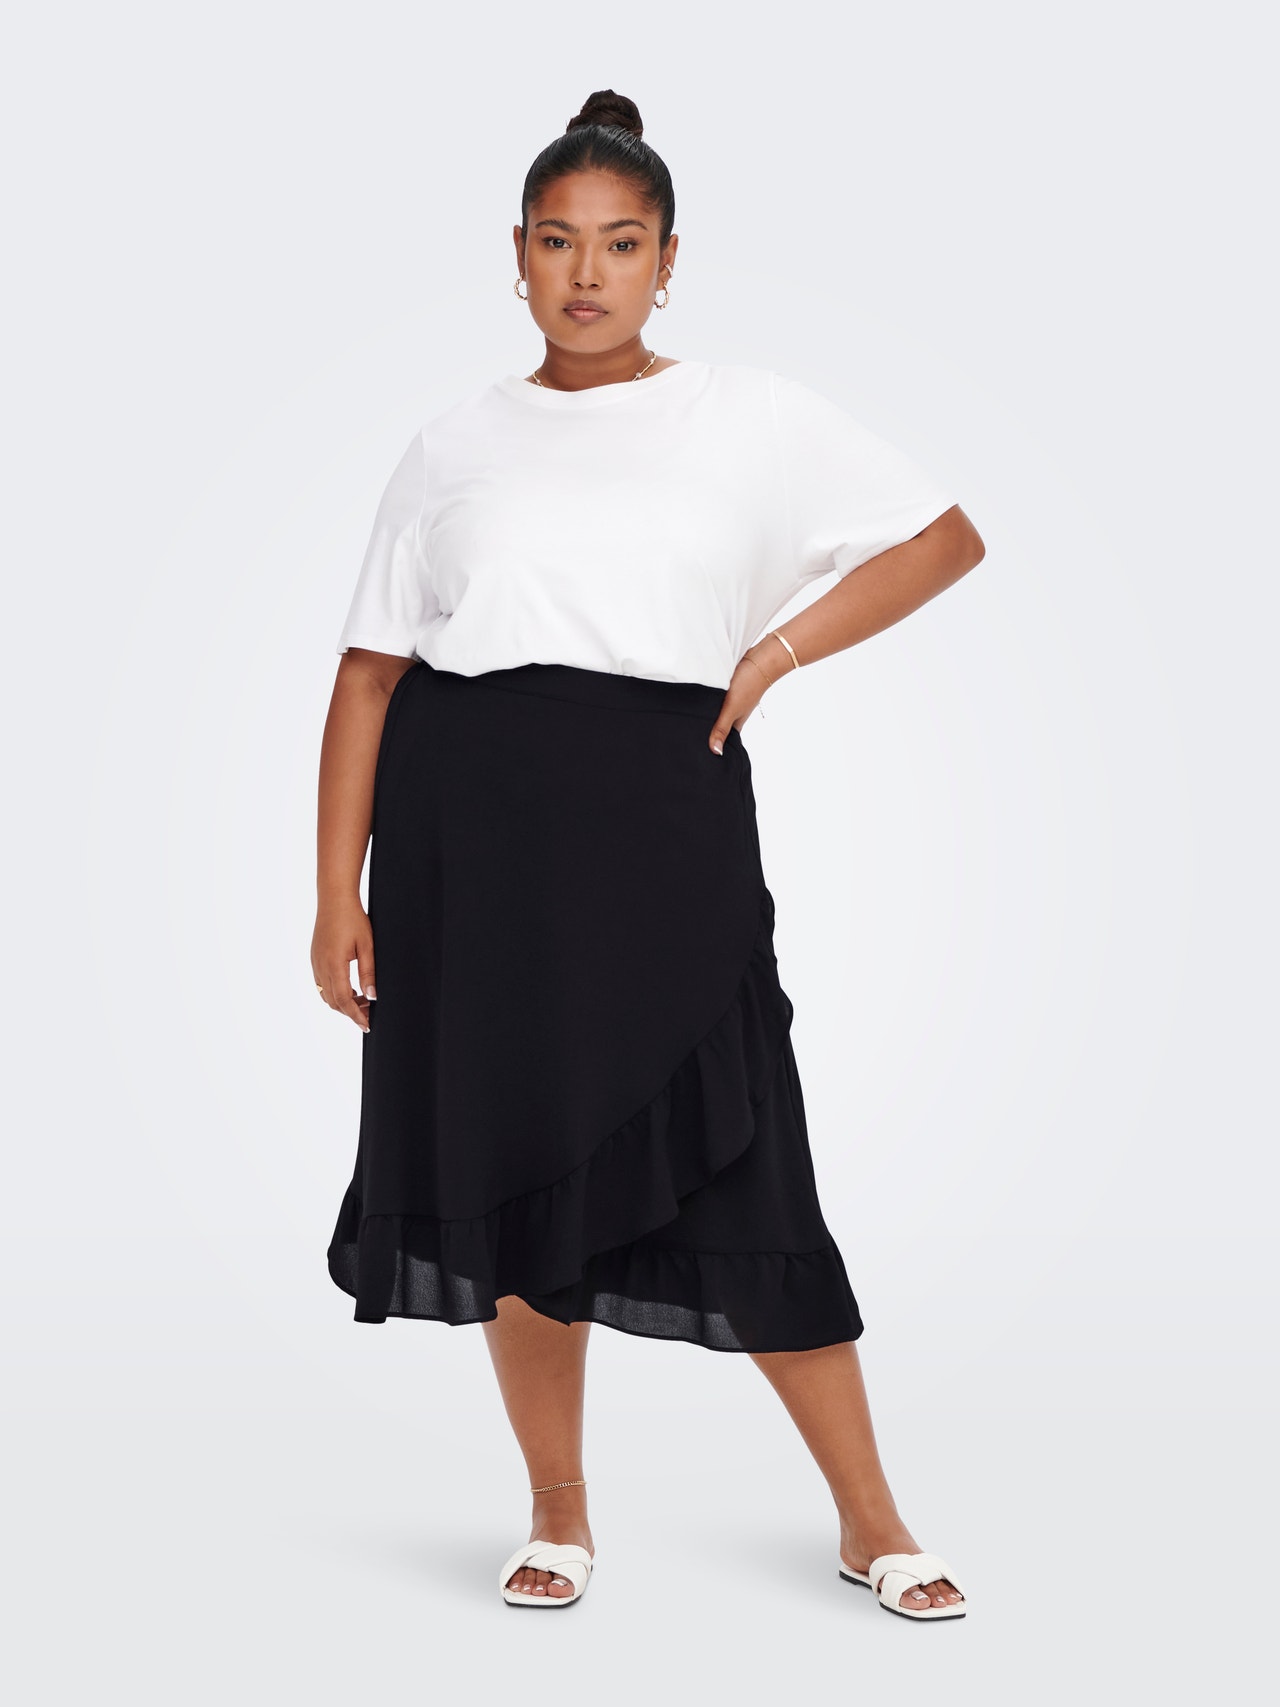 ONLY Curvy - Portefeuille Jupe -Black - 15265902